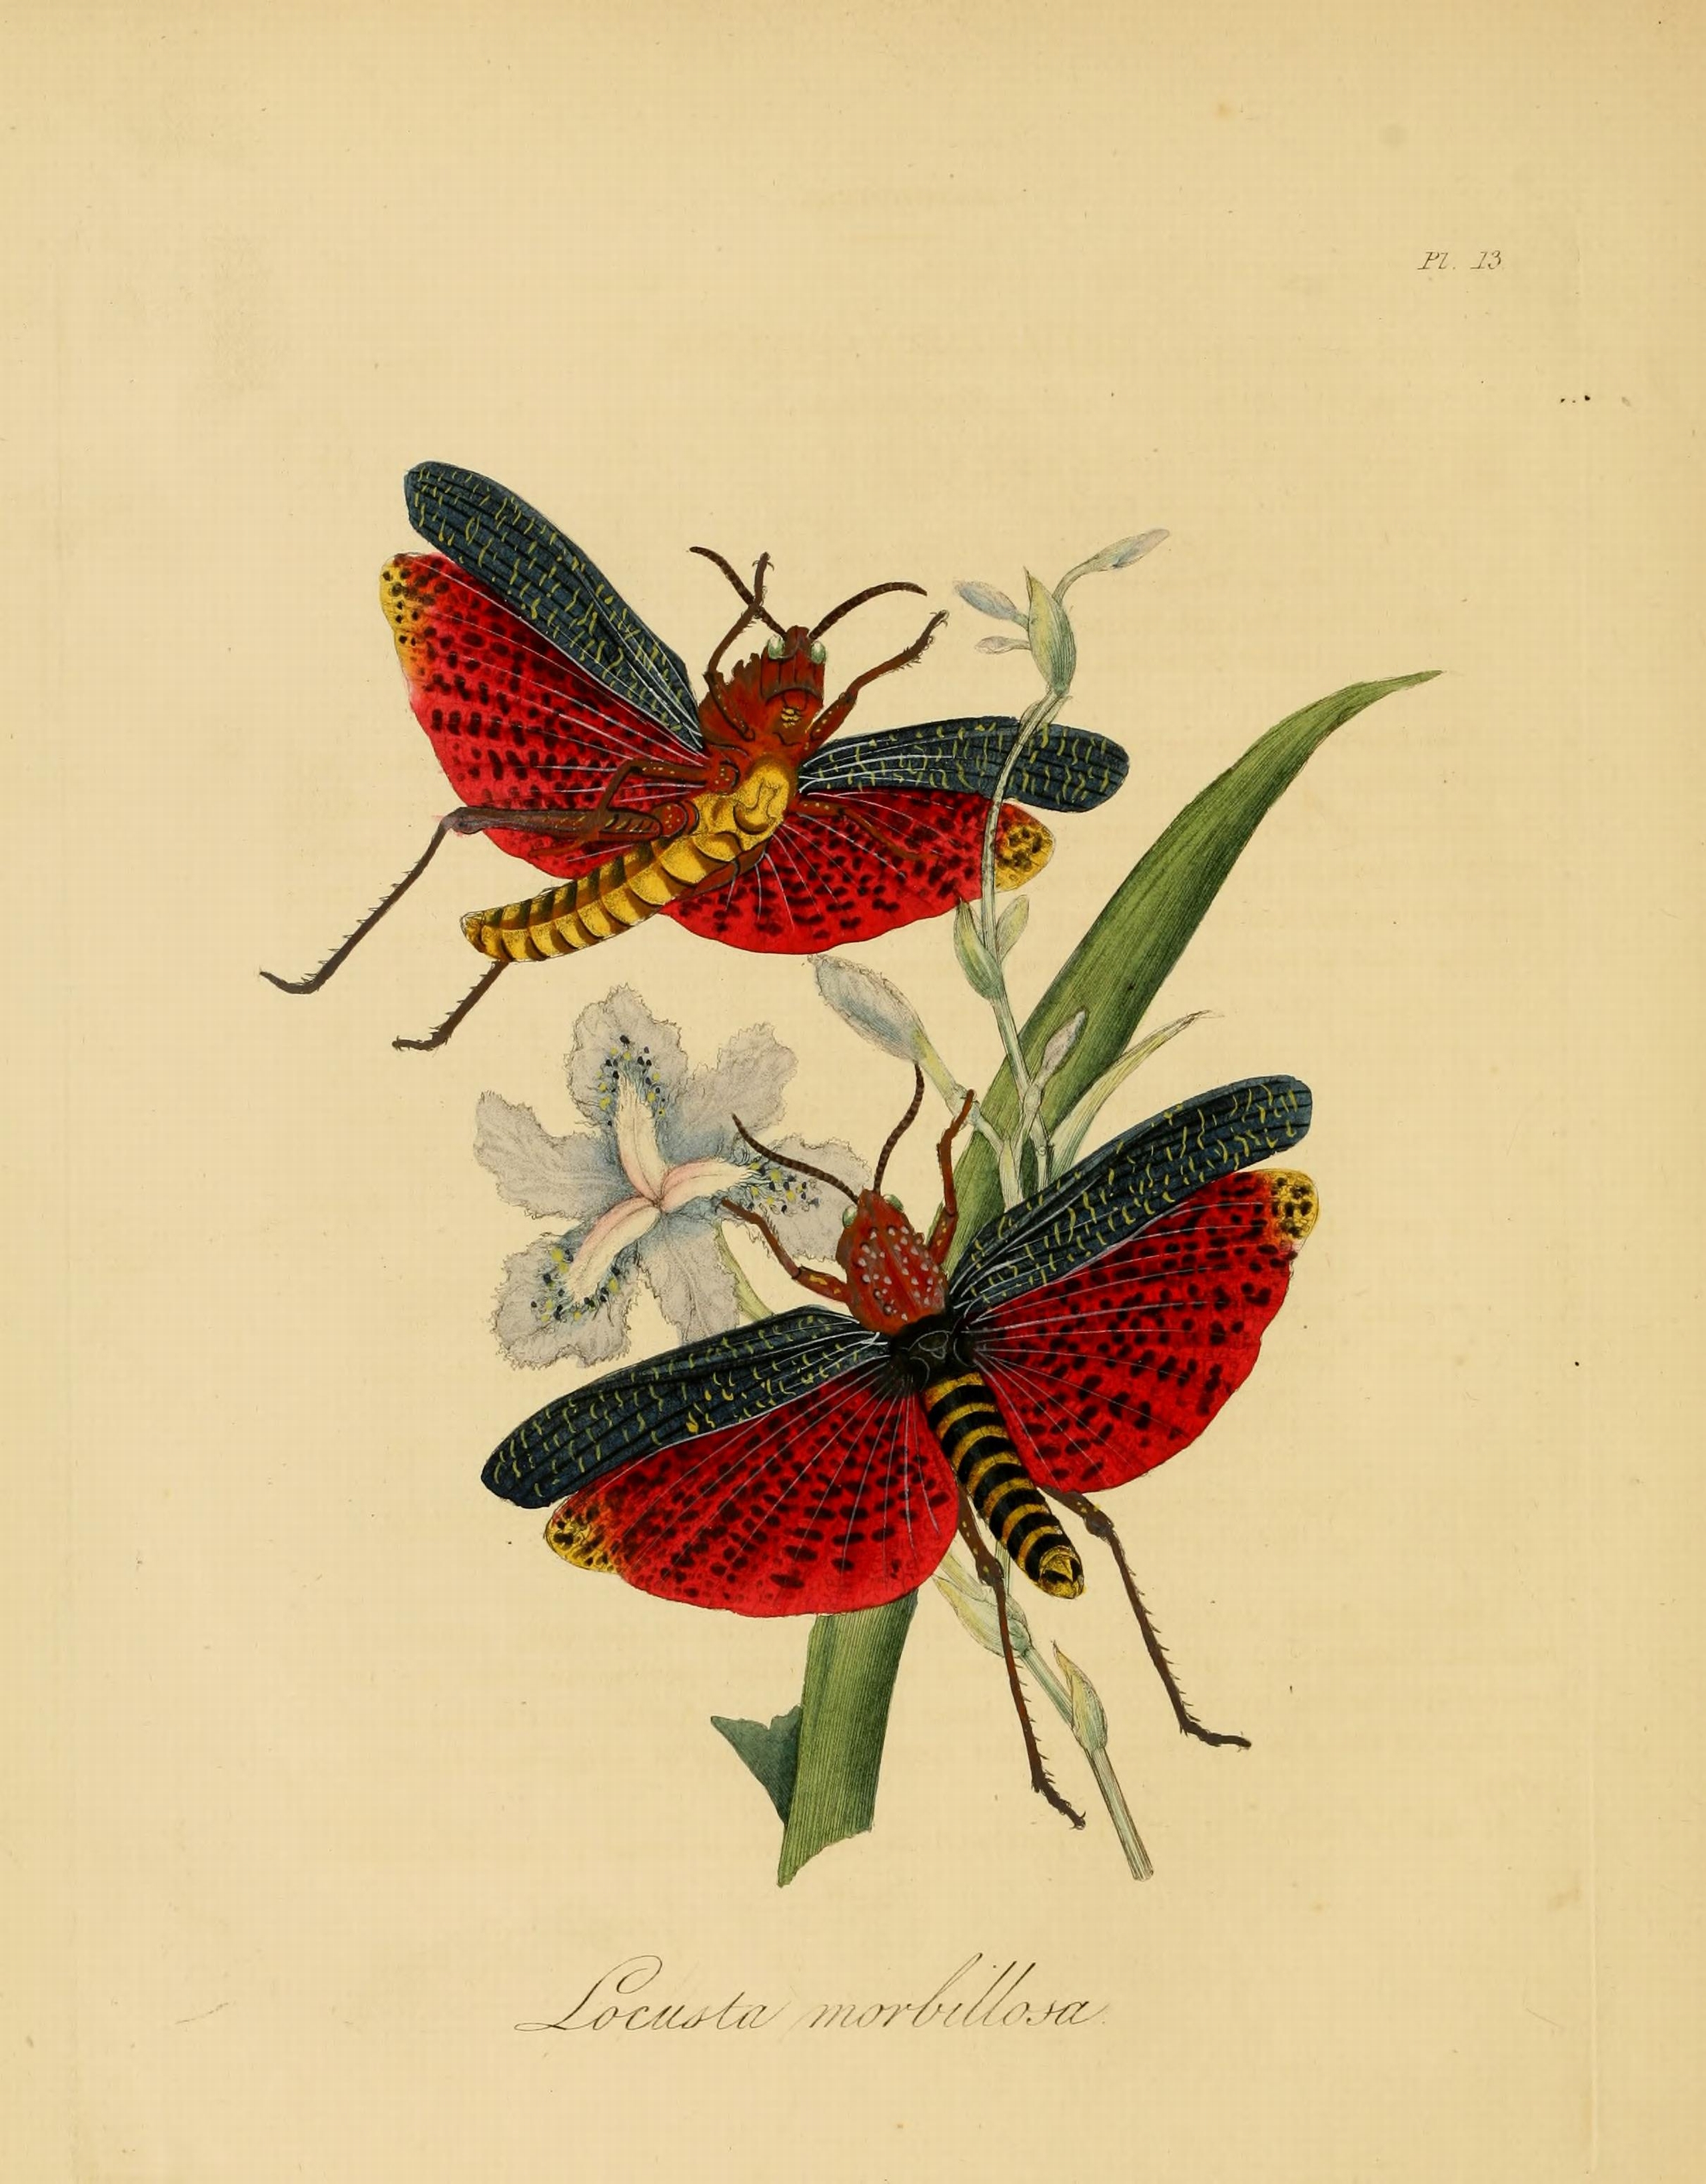 Donovan - Insects of China, 1838 - pl 13